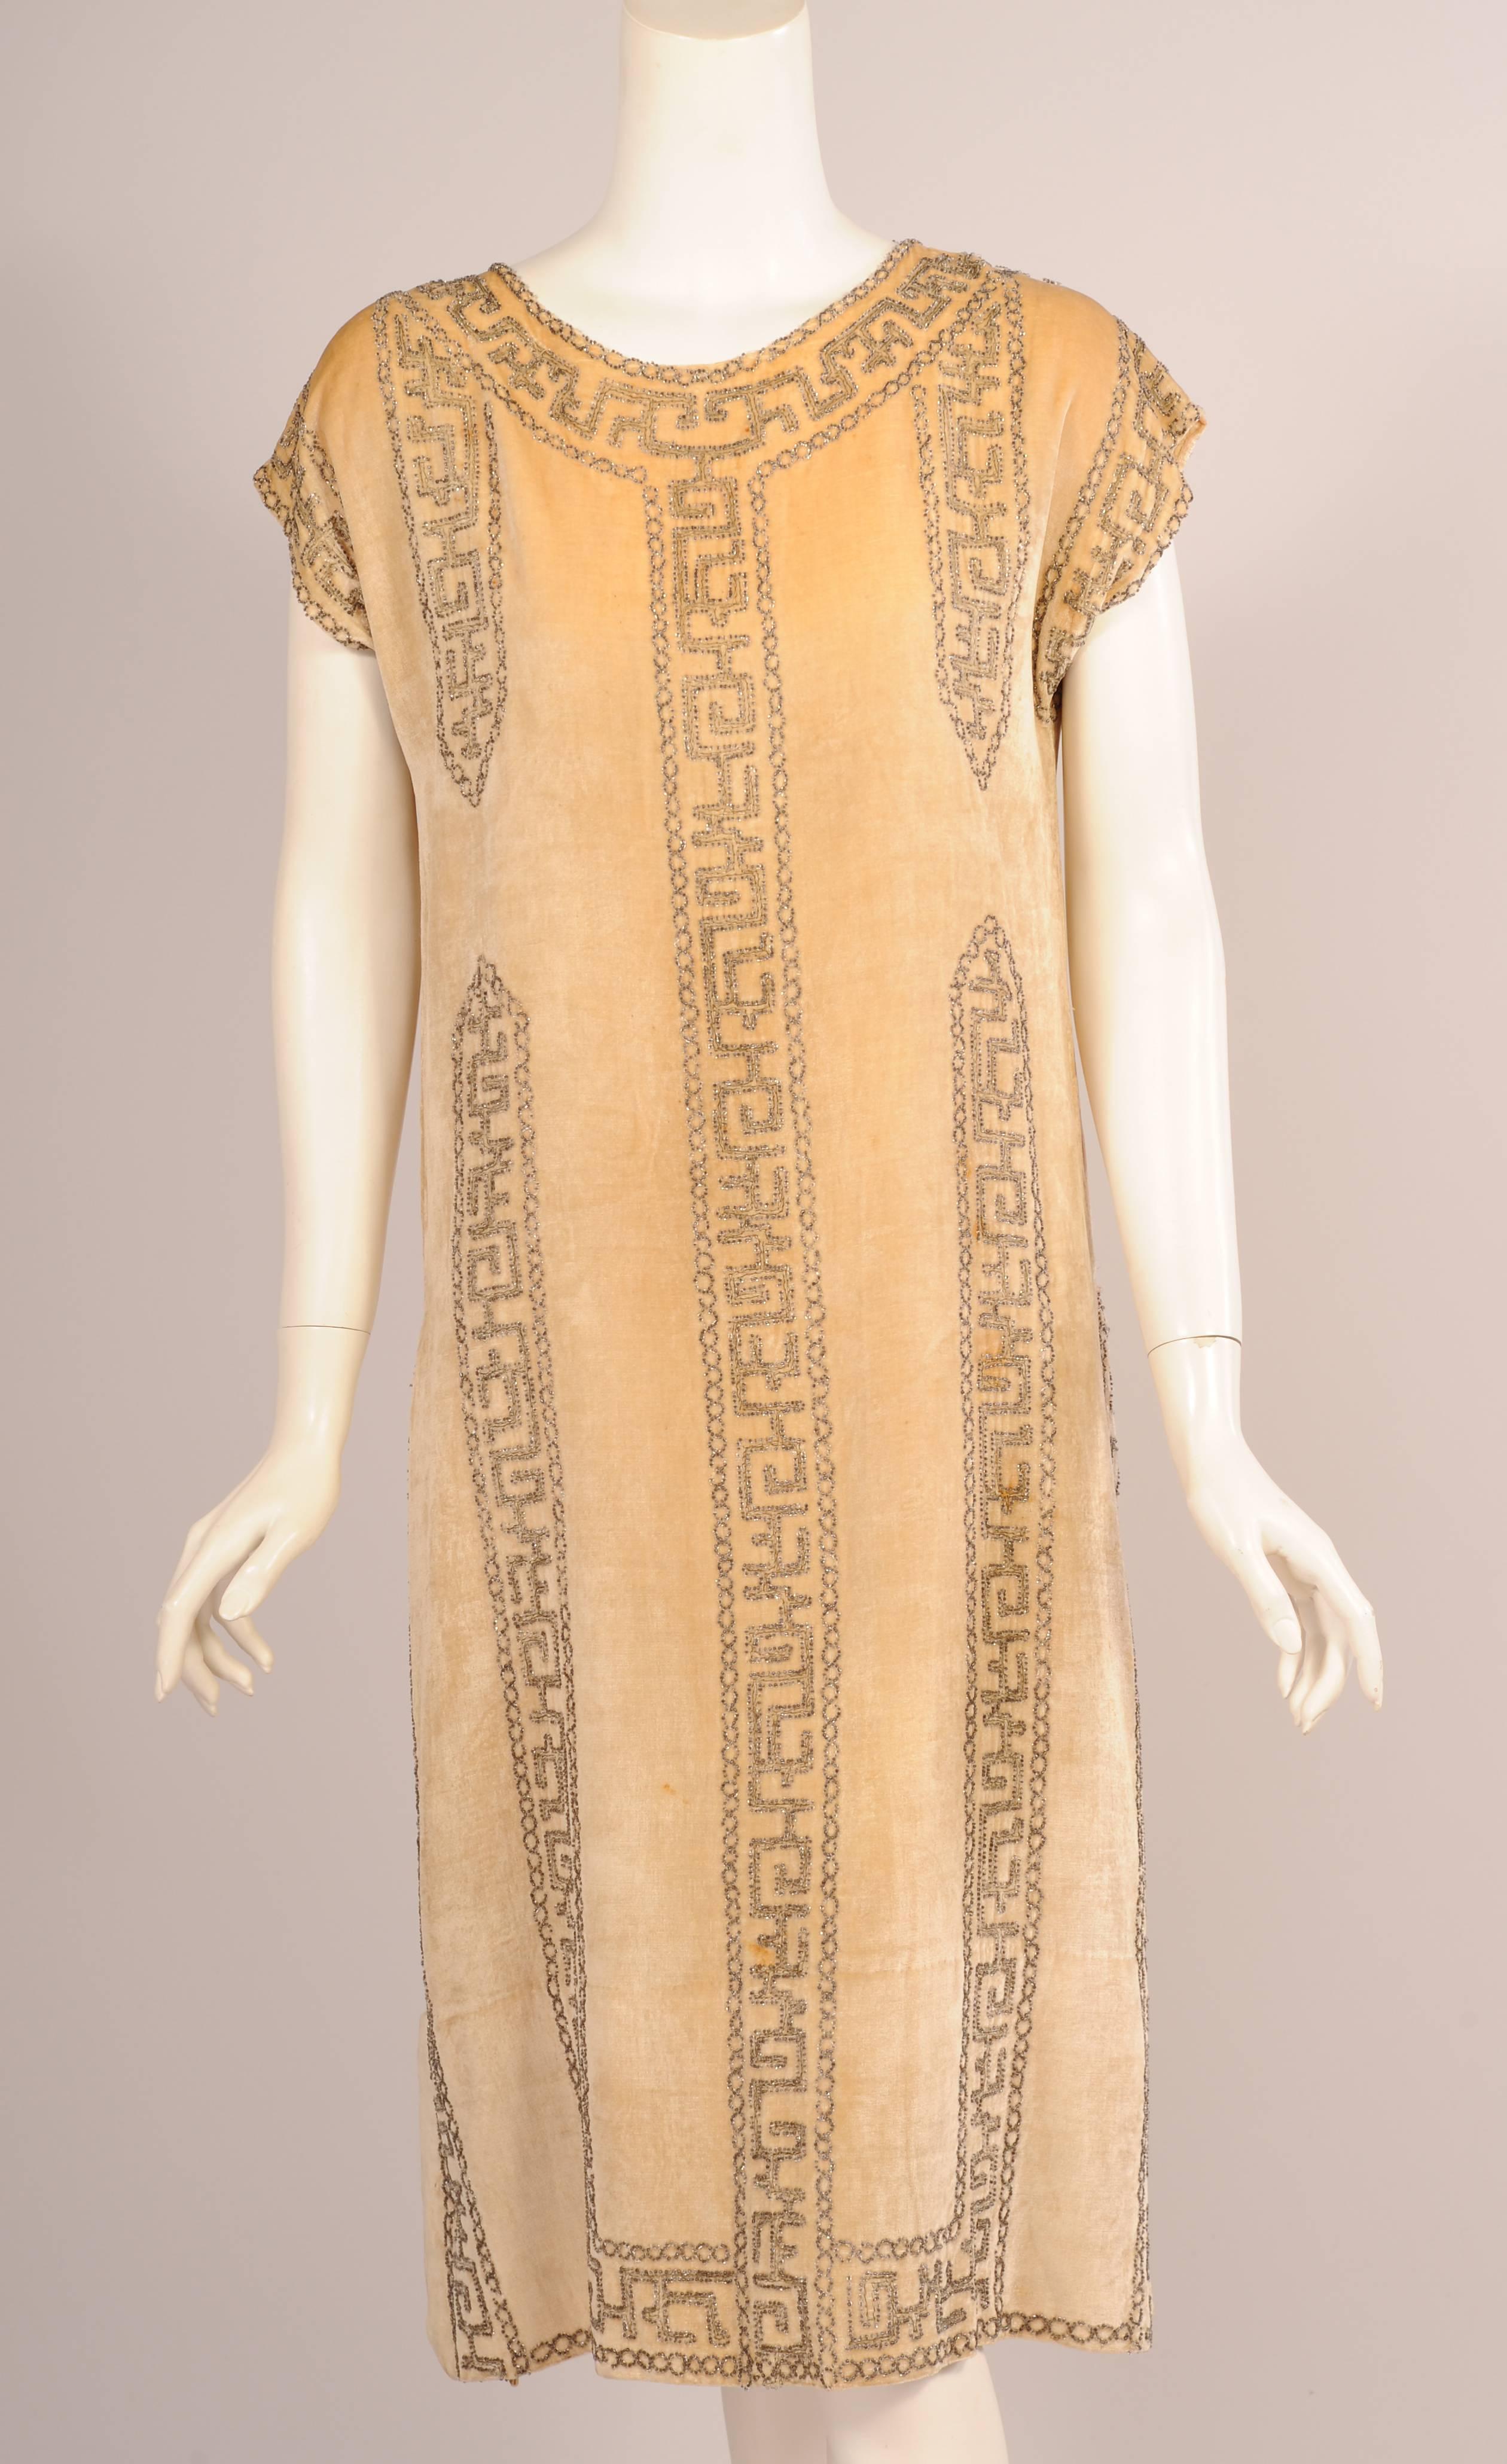 This elegant cream colored velvet flapper dress is embroidered with metallic thread and beaded in an Asian inspired design. The dress has a round neckline, cap sleeves and deep slits om either side. It was Made in France and is labeled a Rue de la